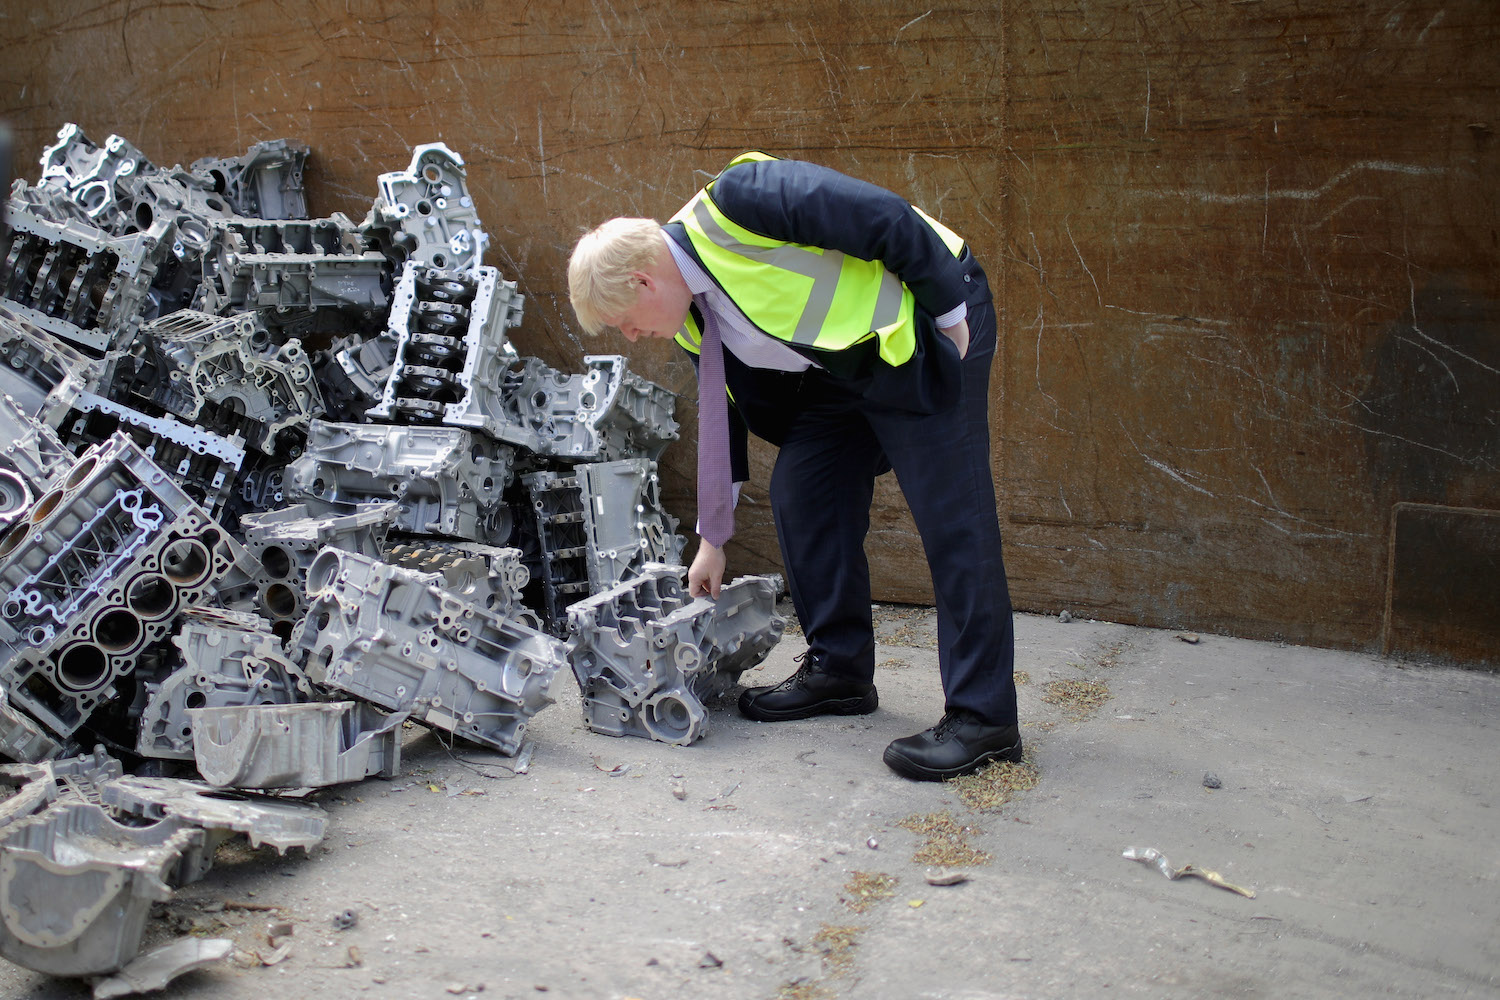 A man examines a V8 engine block in a pile of scrap.